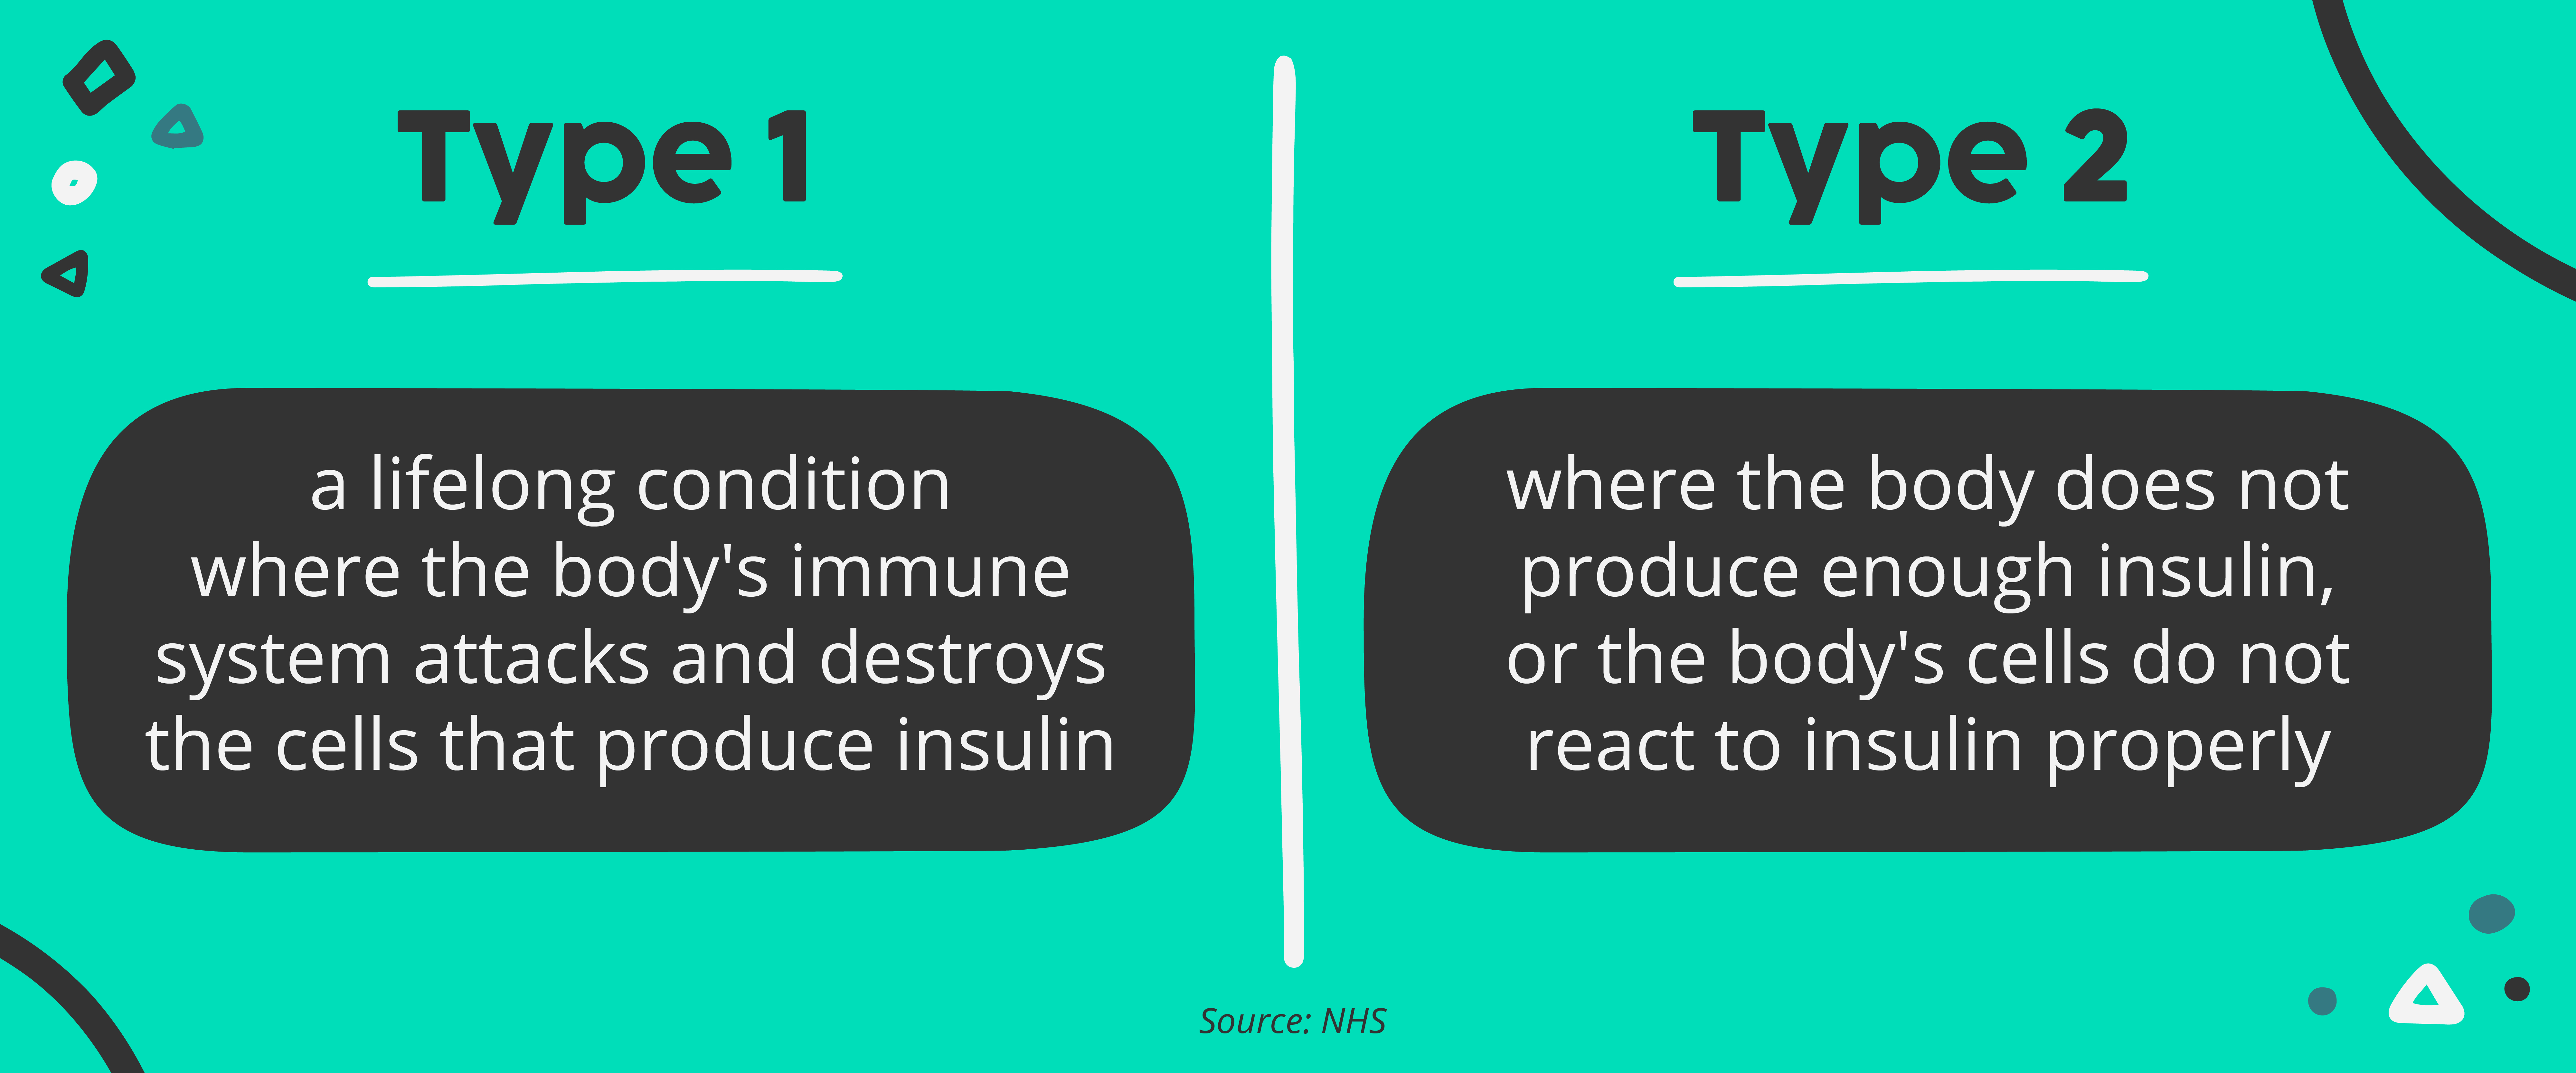 NHS definition of Type 1 and Type 2 diabetes